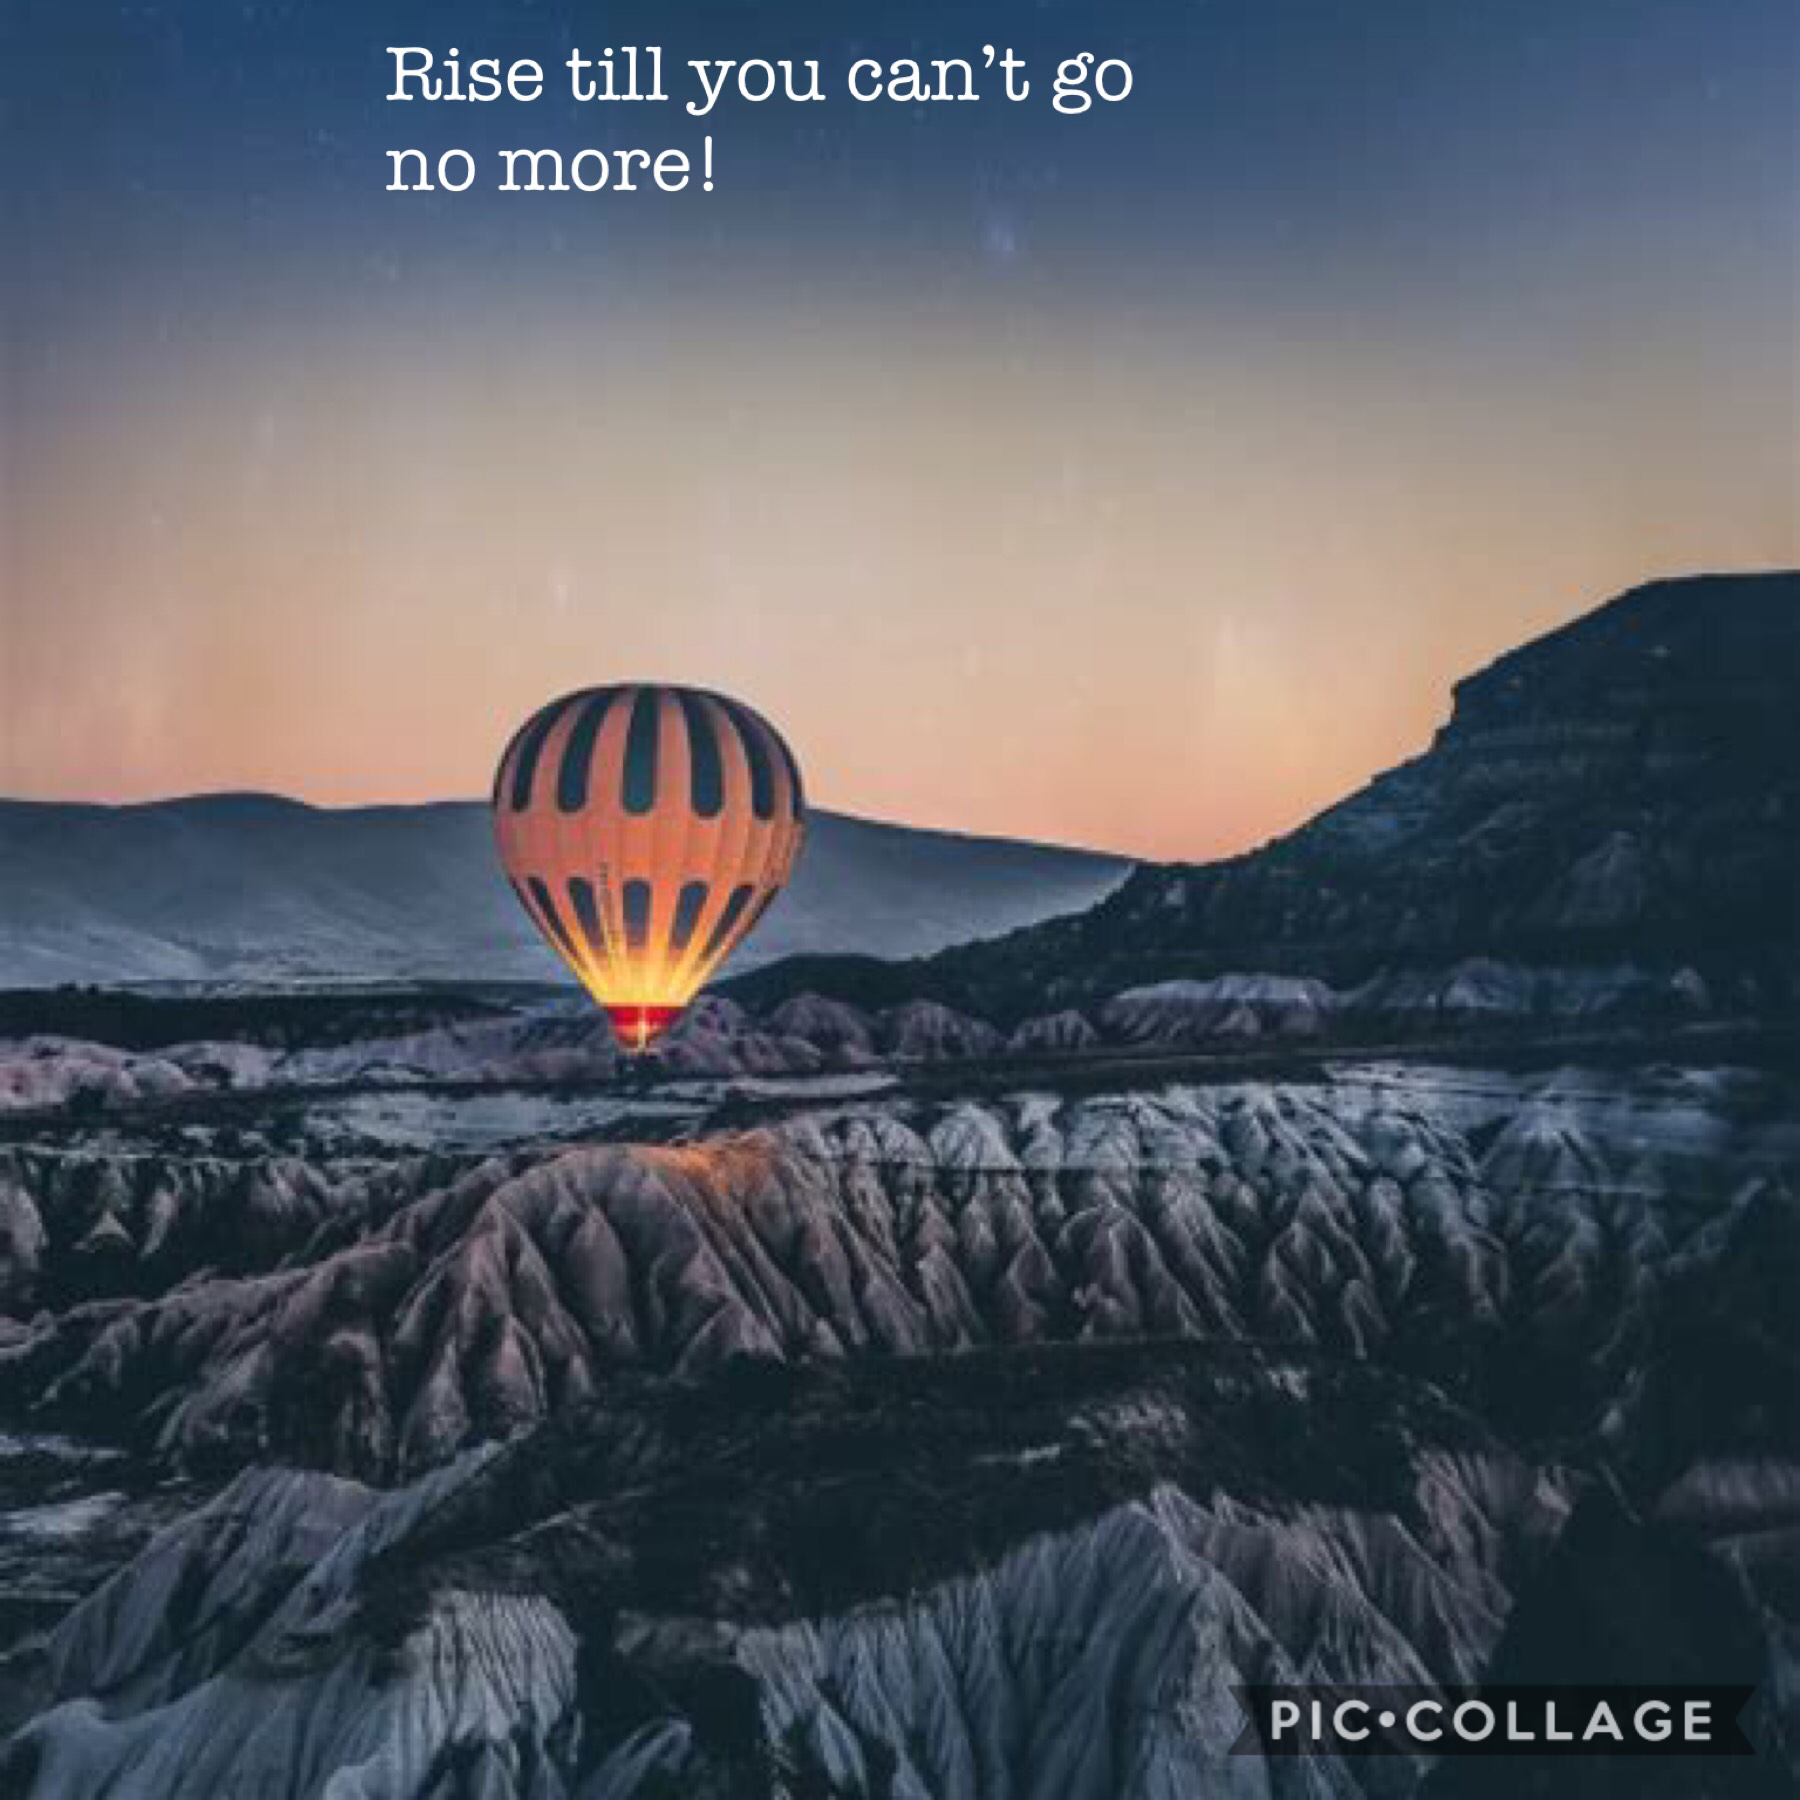 Rise till you can’t go no more